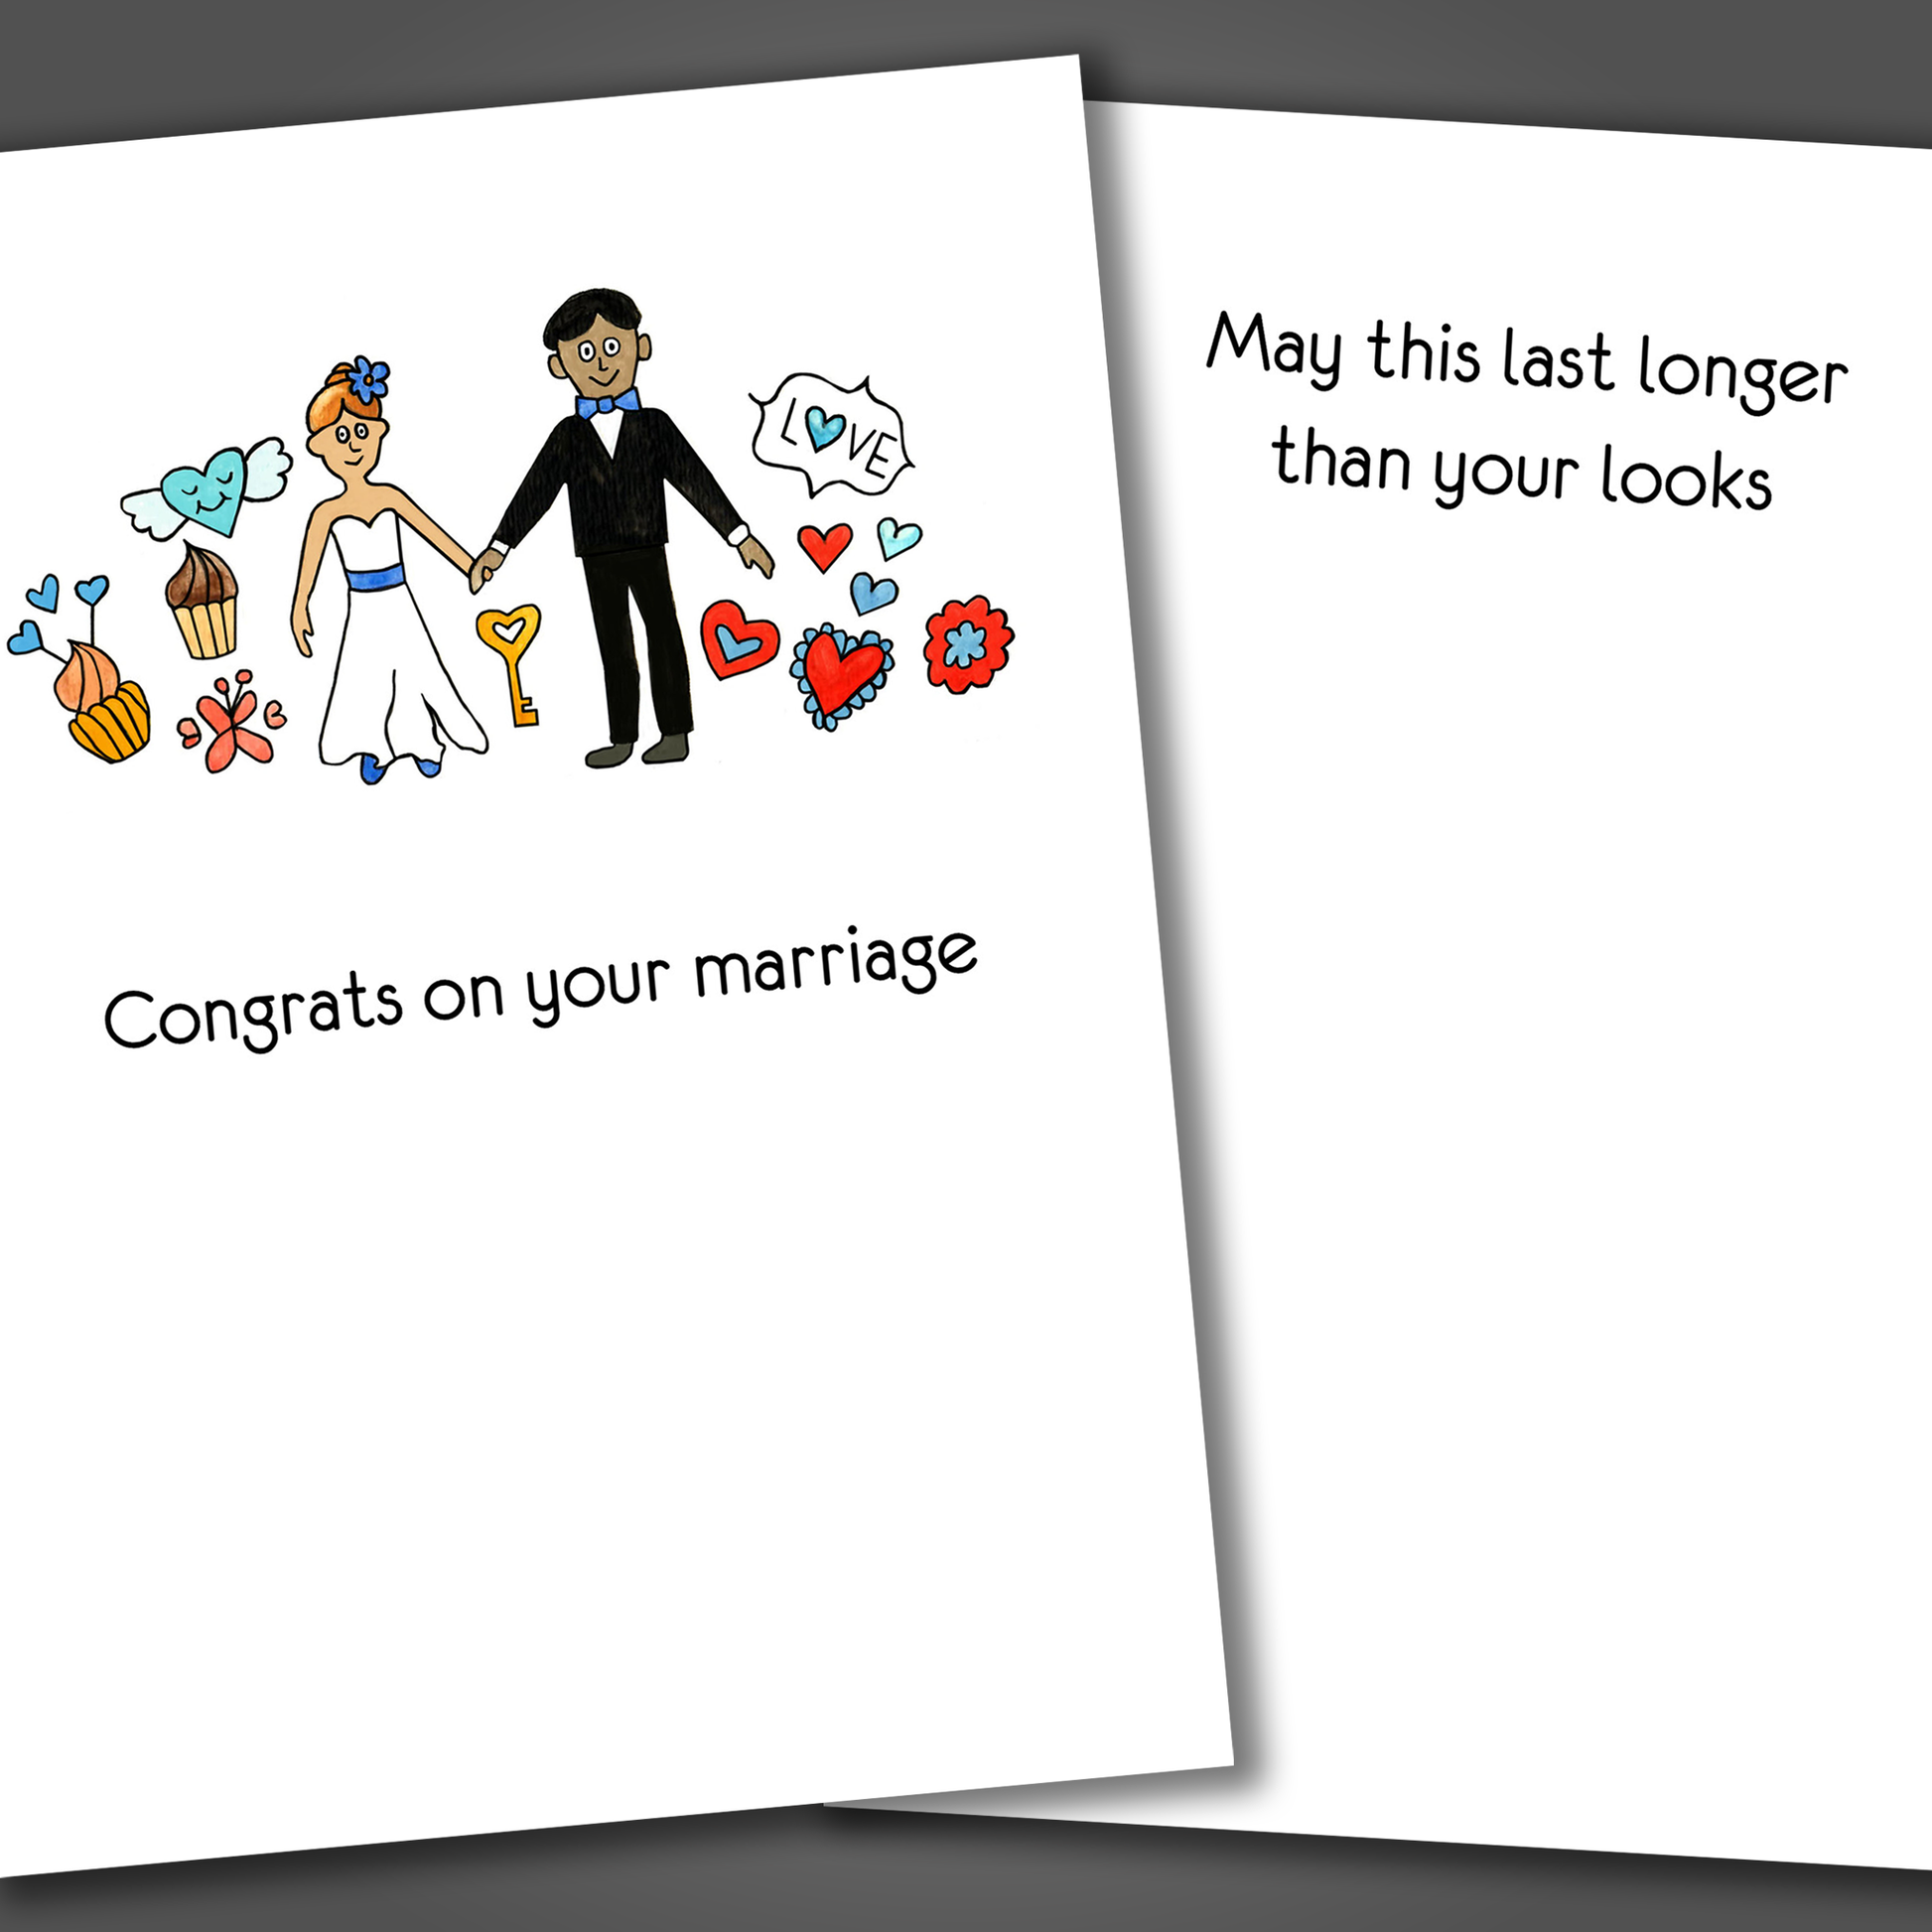 Funny wedding card with drawing of bride and groom holding hands on the front of the card. Inside the card is a funny joke that says may this last longer than your looks.